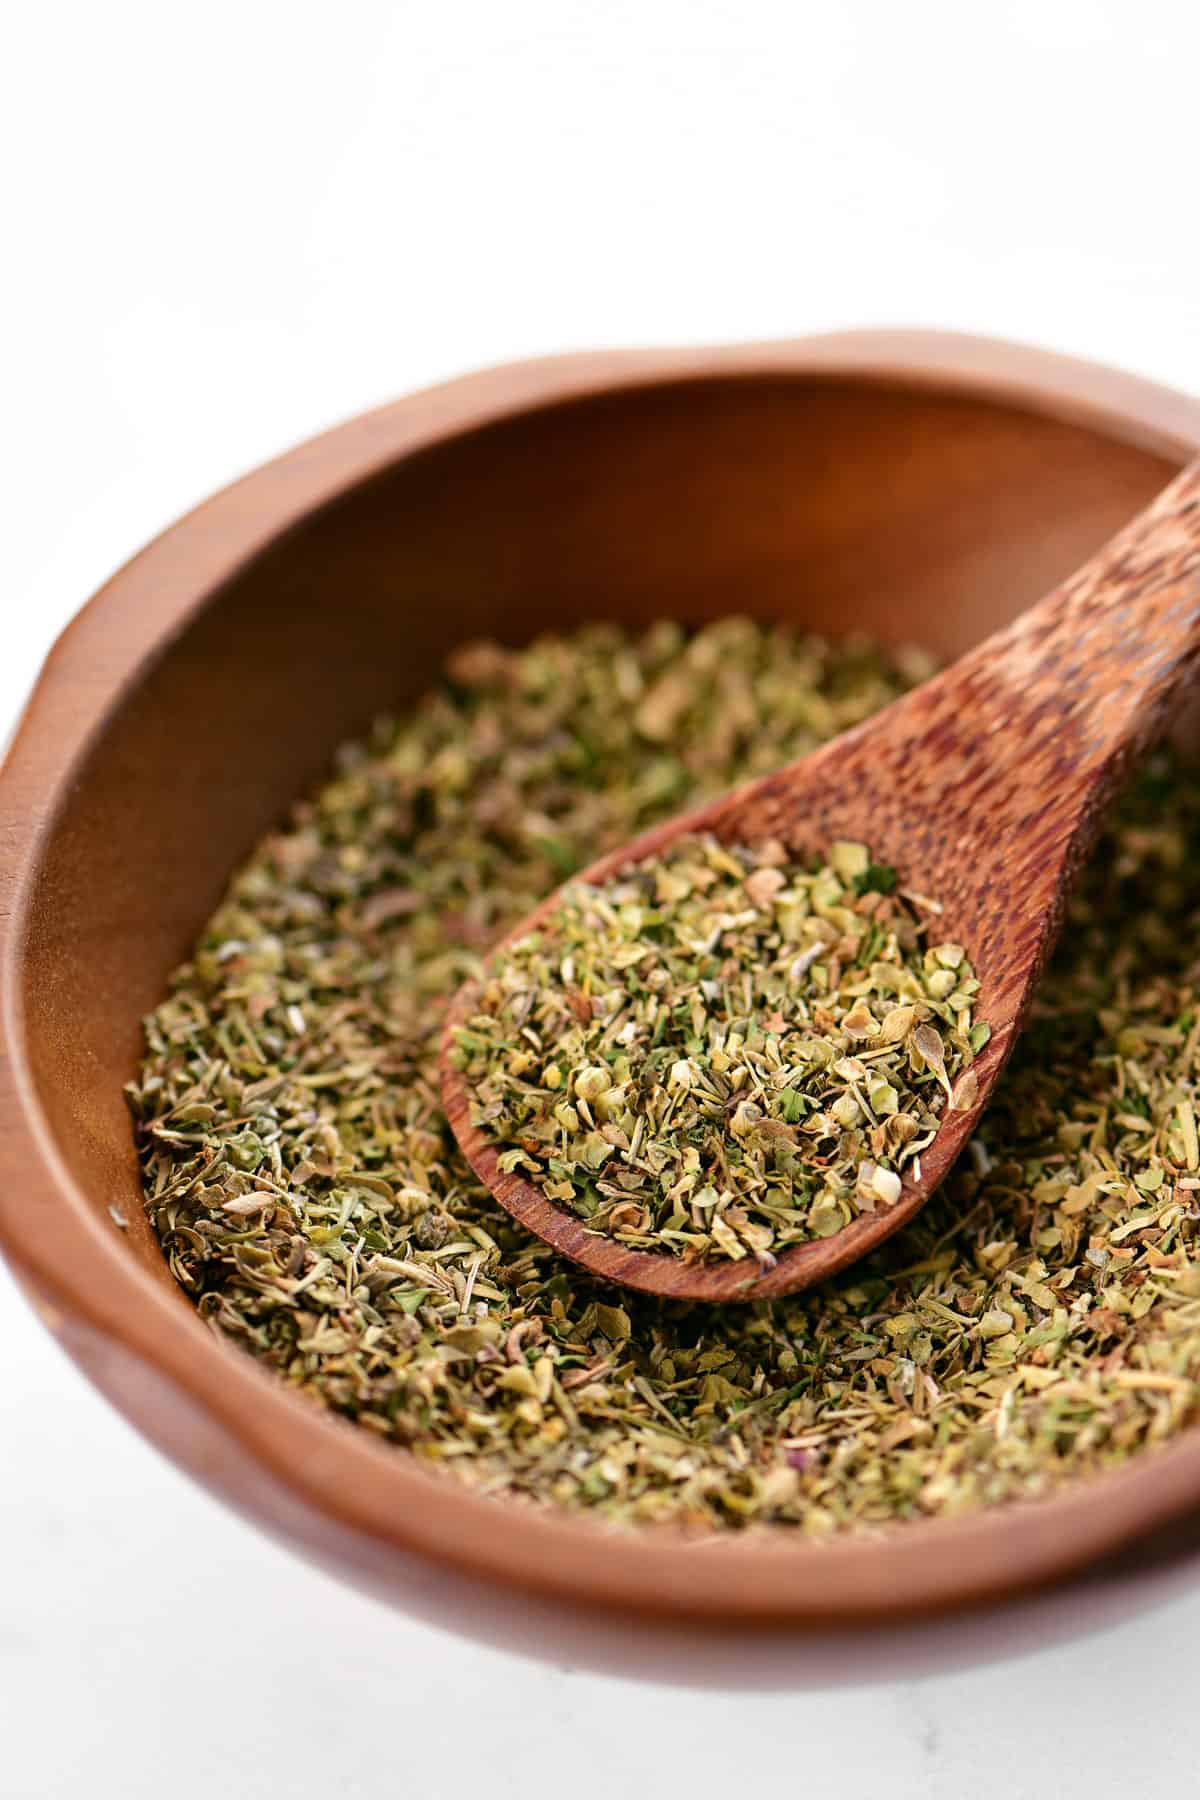 An Italian seasoning substitute mix on a wooden spoon in a bowl filled with seasonings.